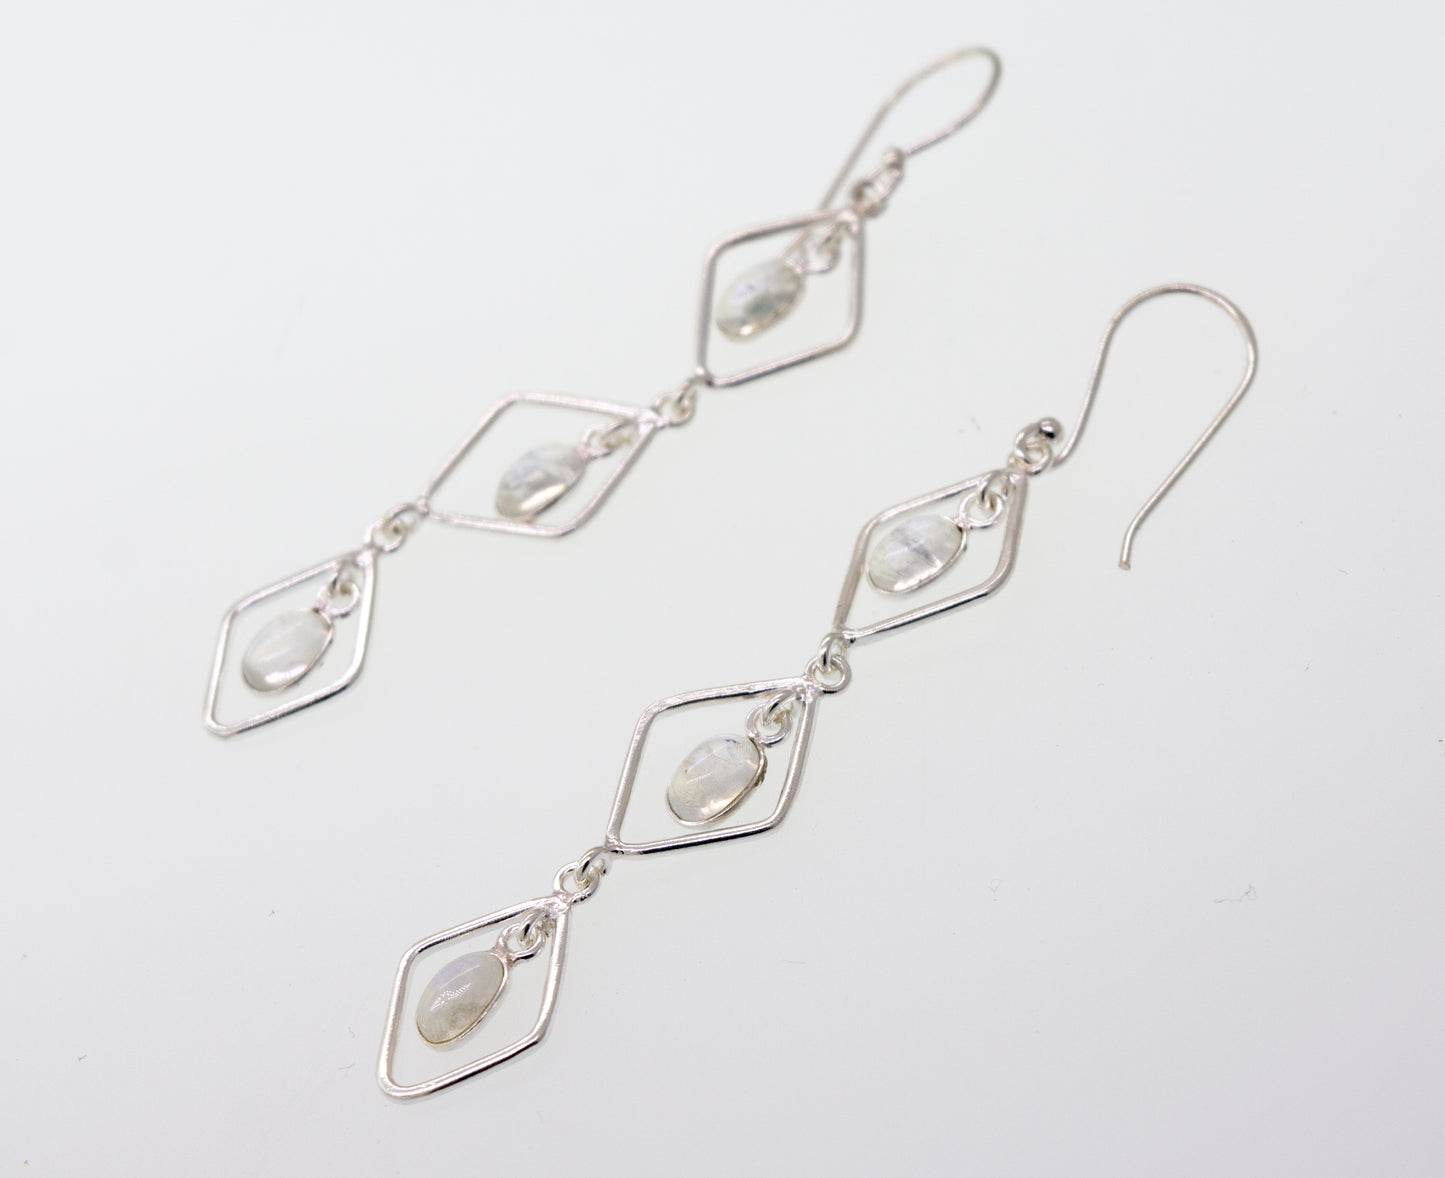 A pair of Super Silver Wire Diamond Earrings with Moonstone, 2.5 inches long.